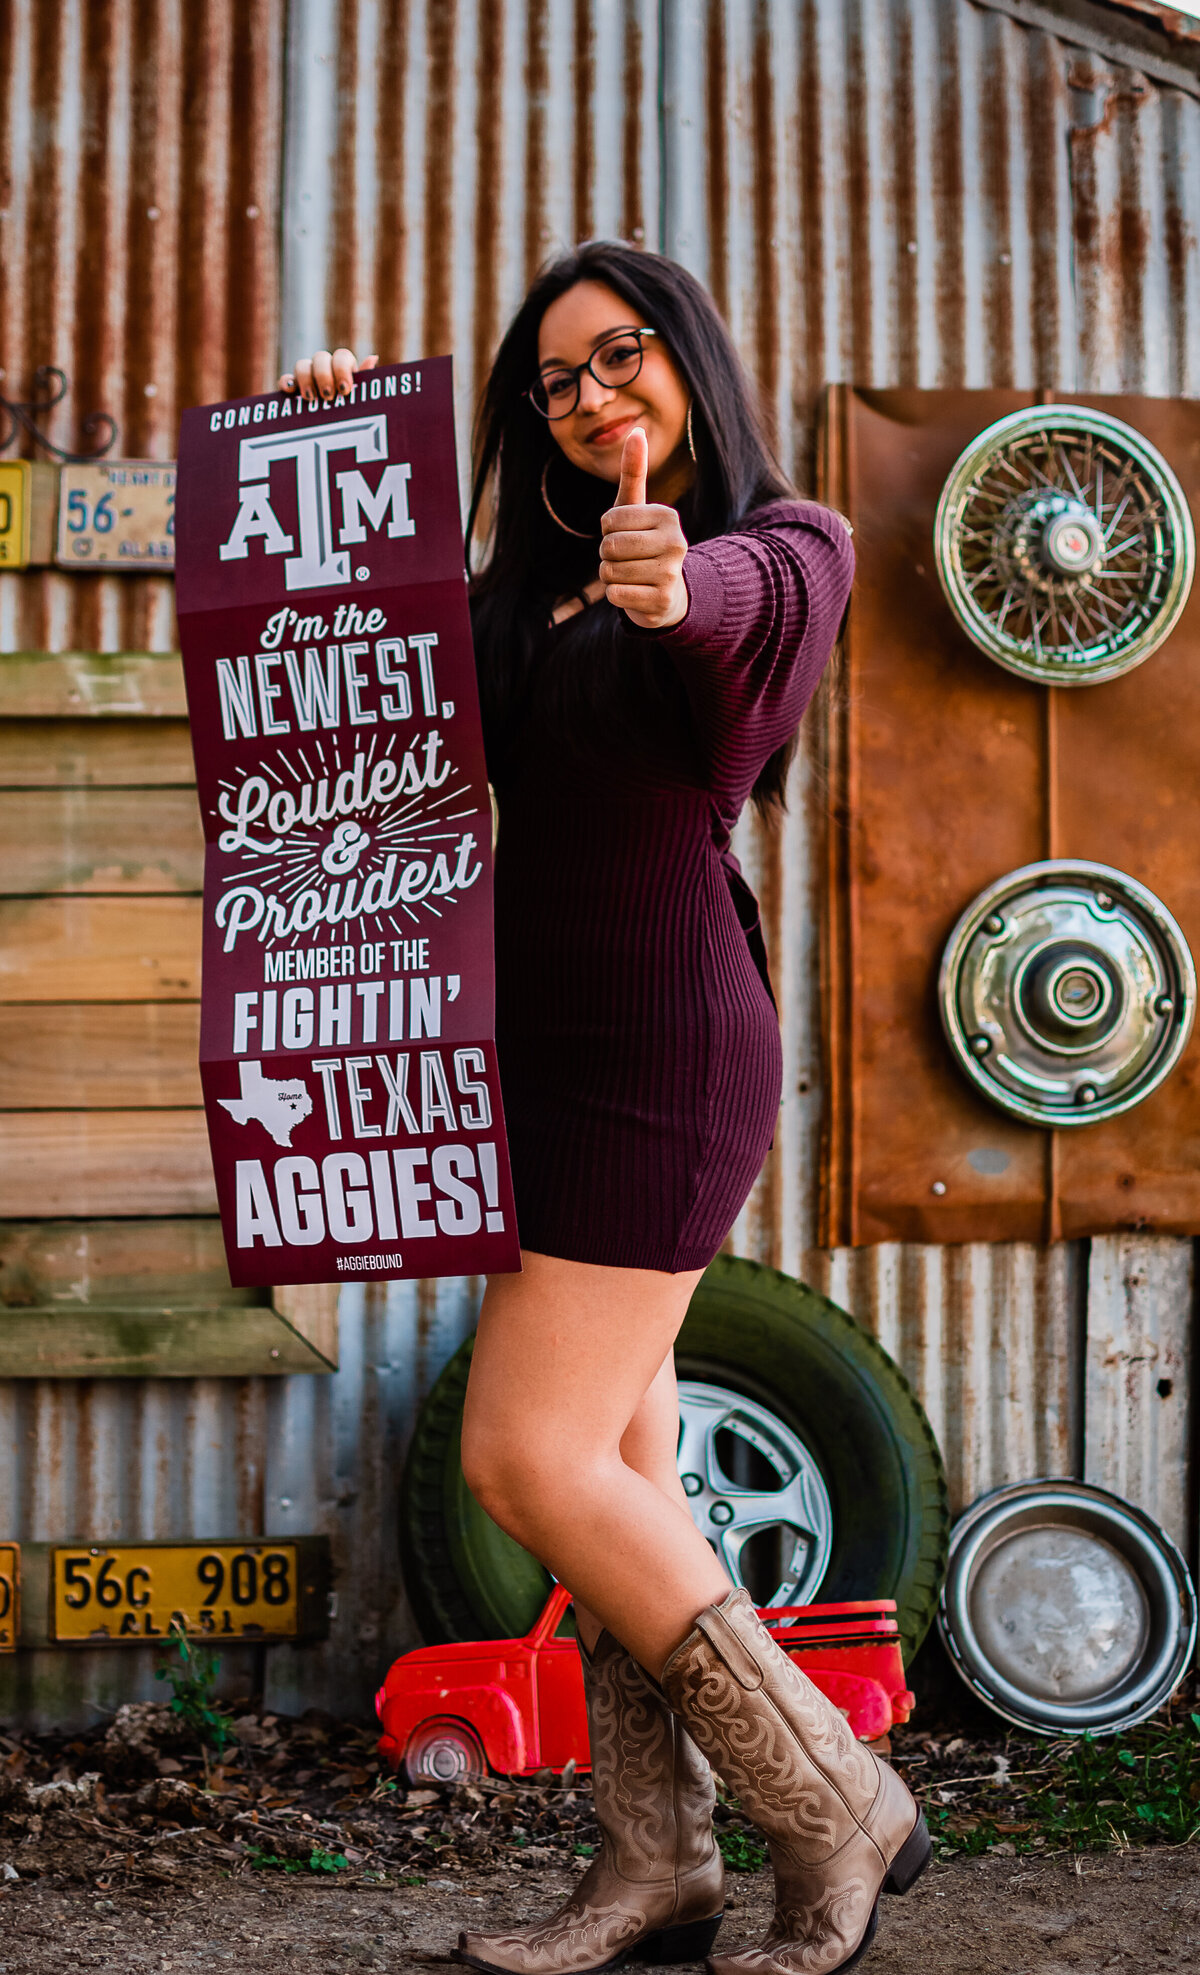 A recent graduate hold a Texas A&M  banner while showing the "gig em" sign.